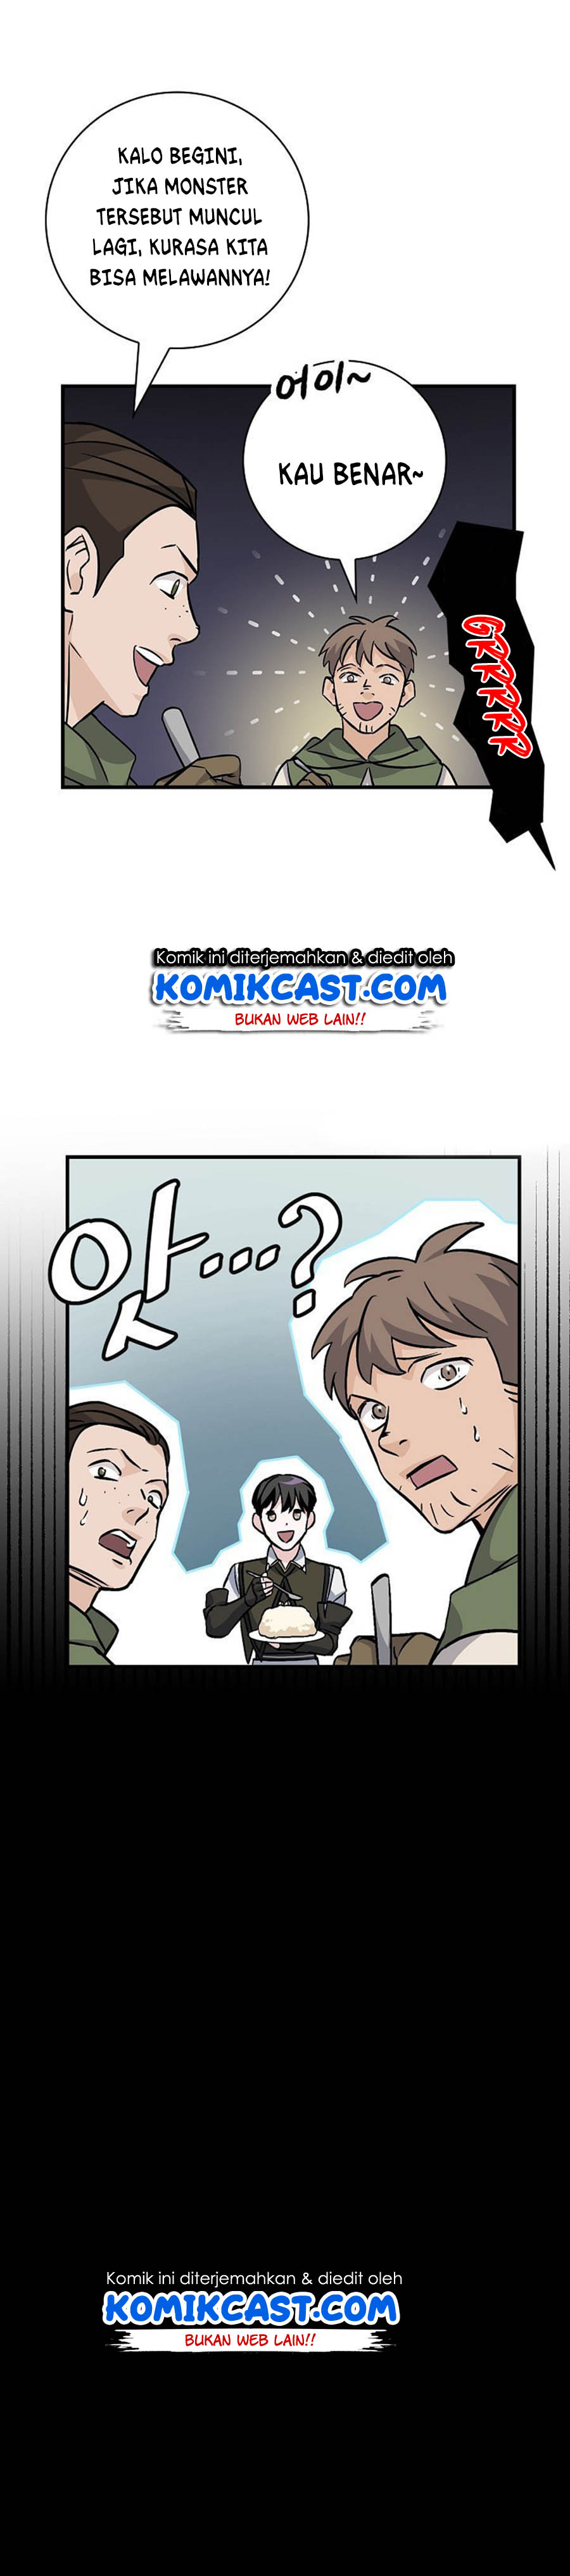 Leveling Up, by Only Eating! Chapter 40